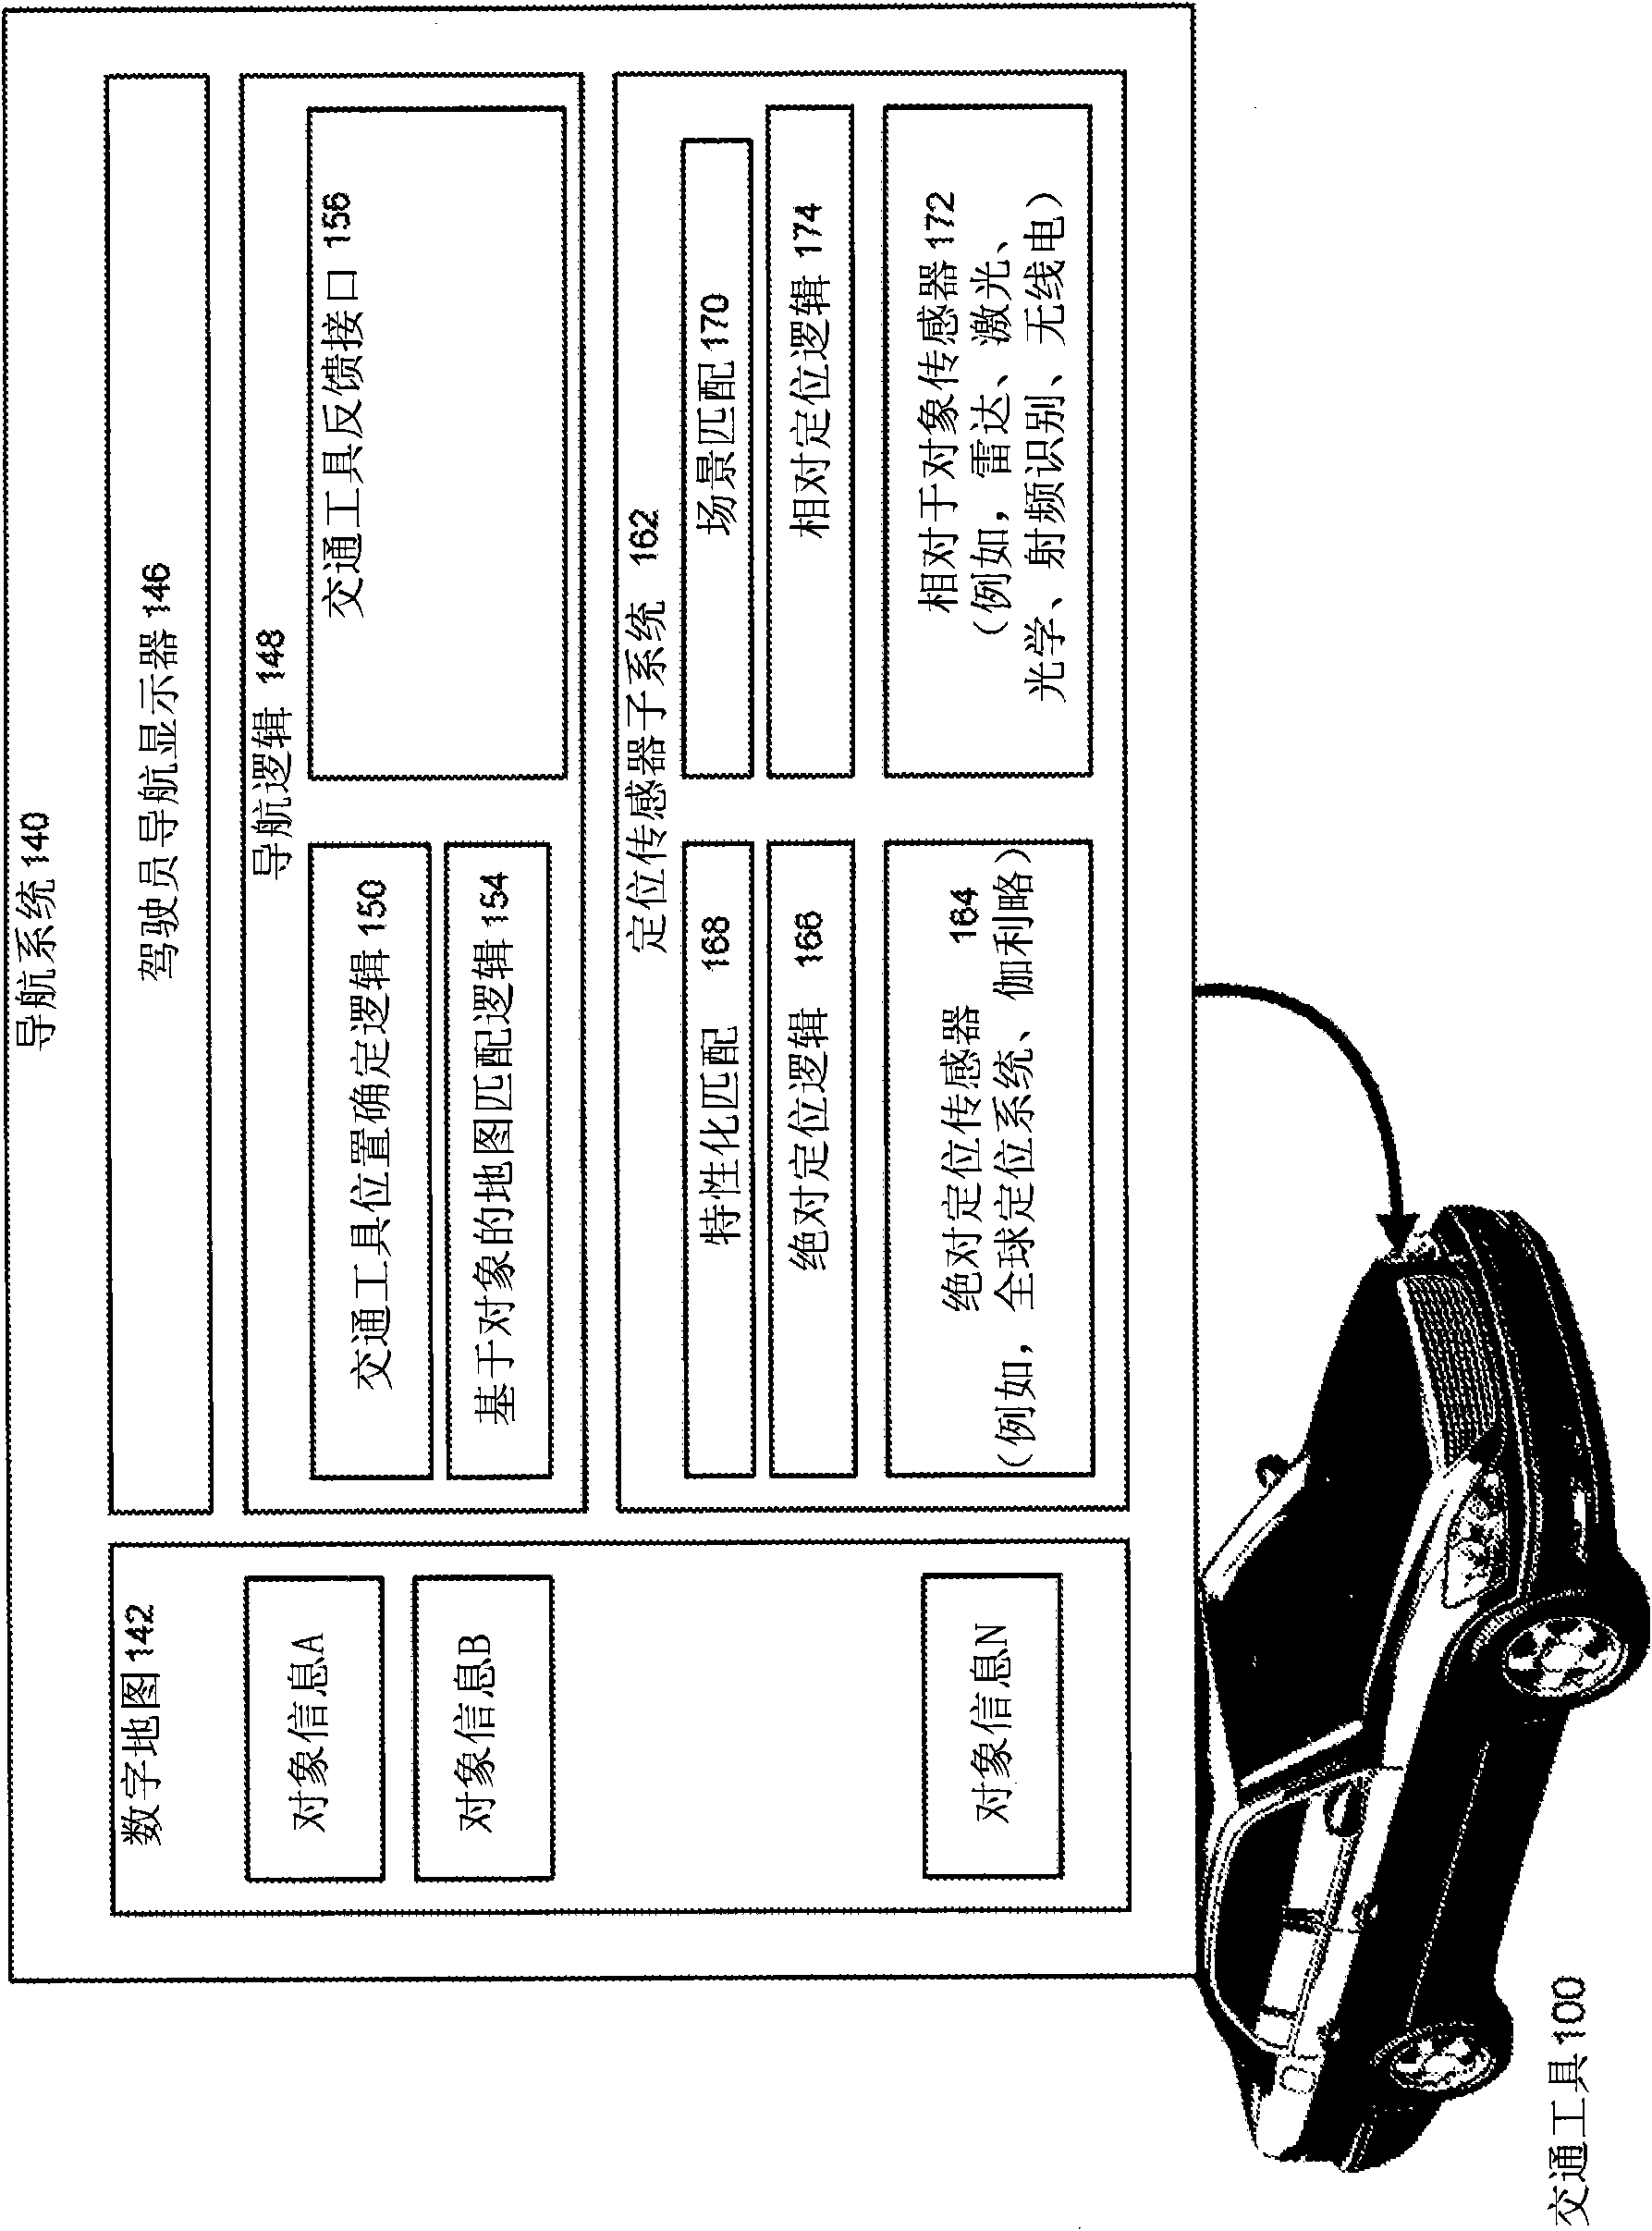 Method for map matching with sensor detected objects